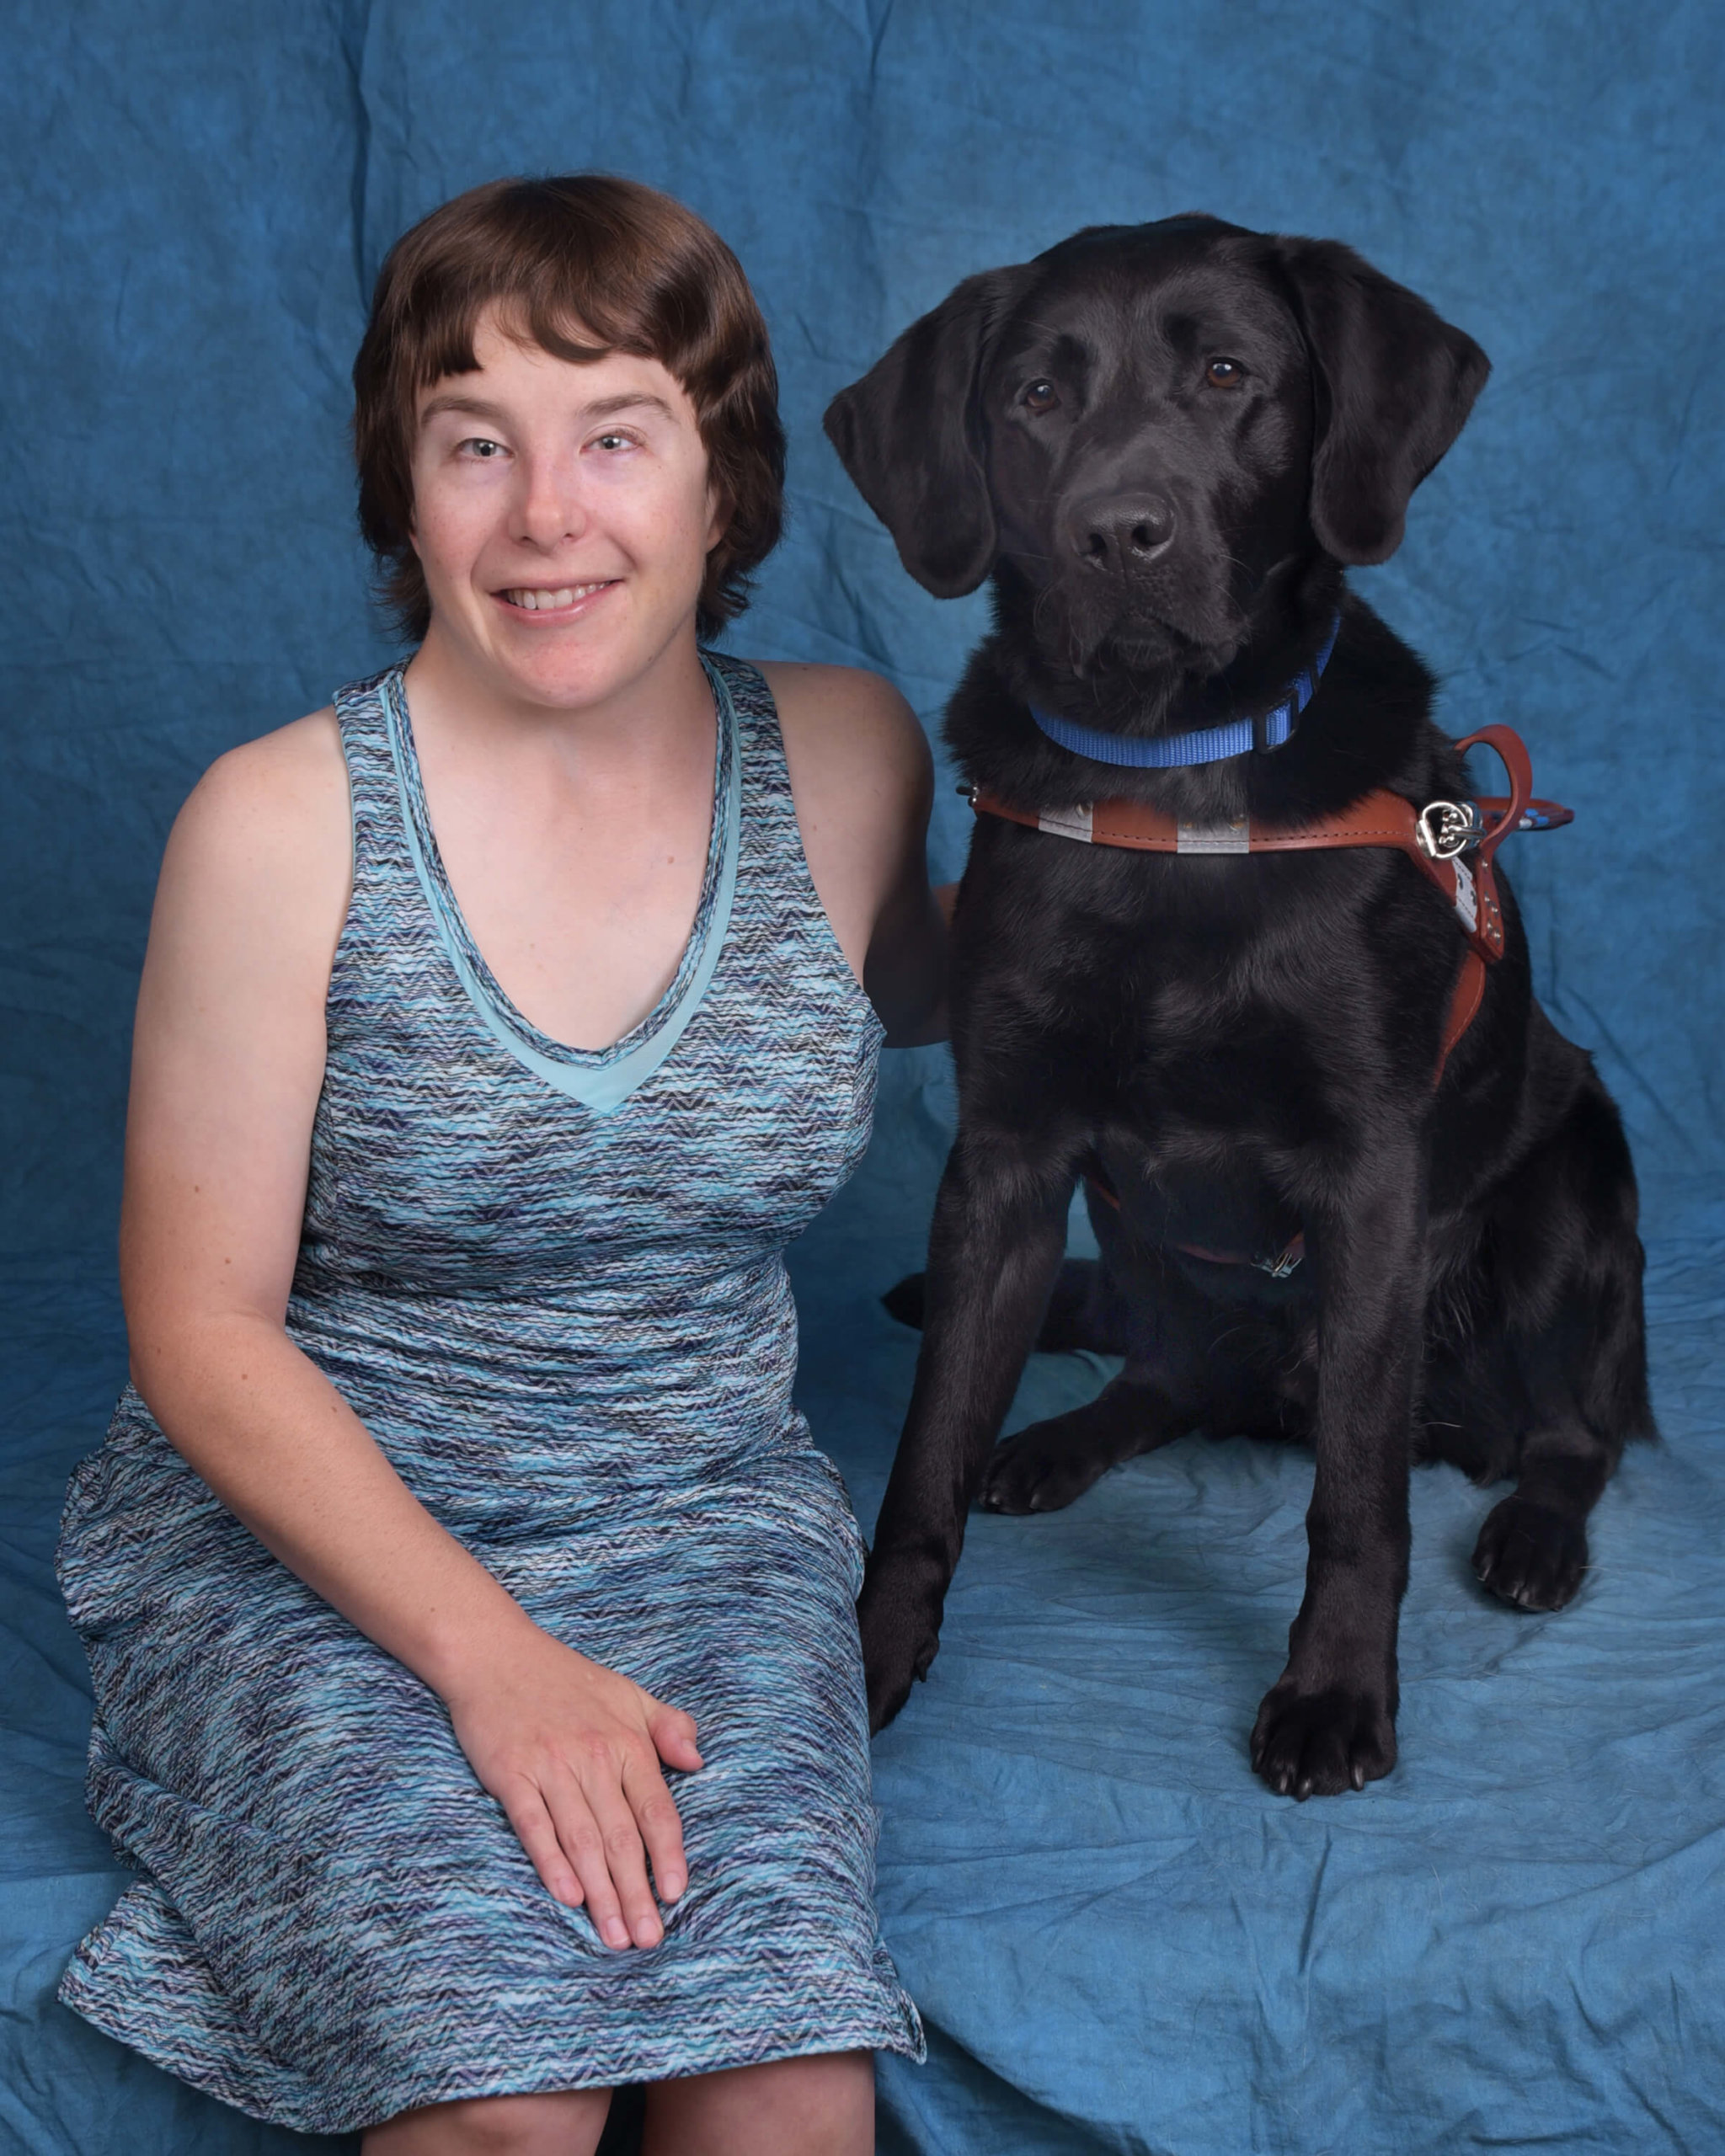 Kimberly and Sparrow, a black lab guide dog in harness.